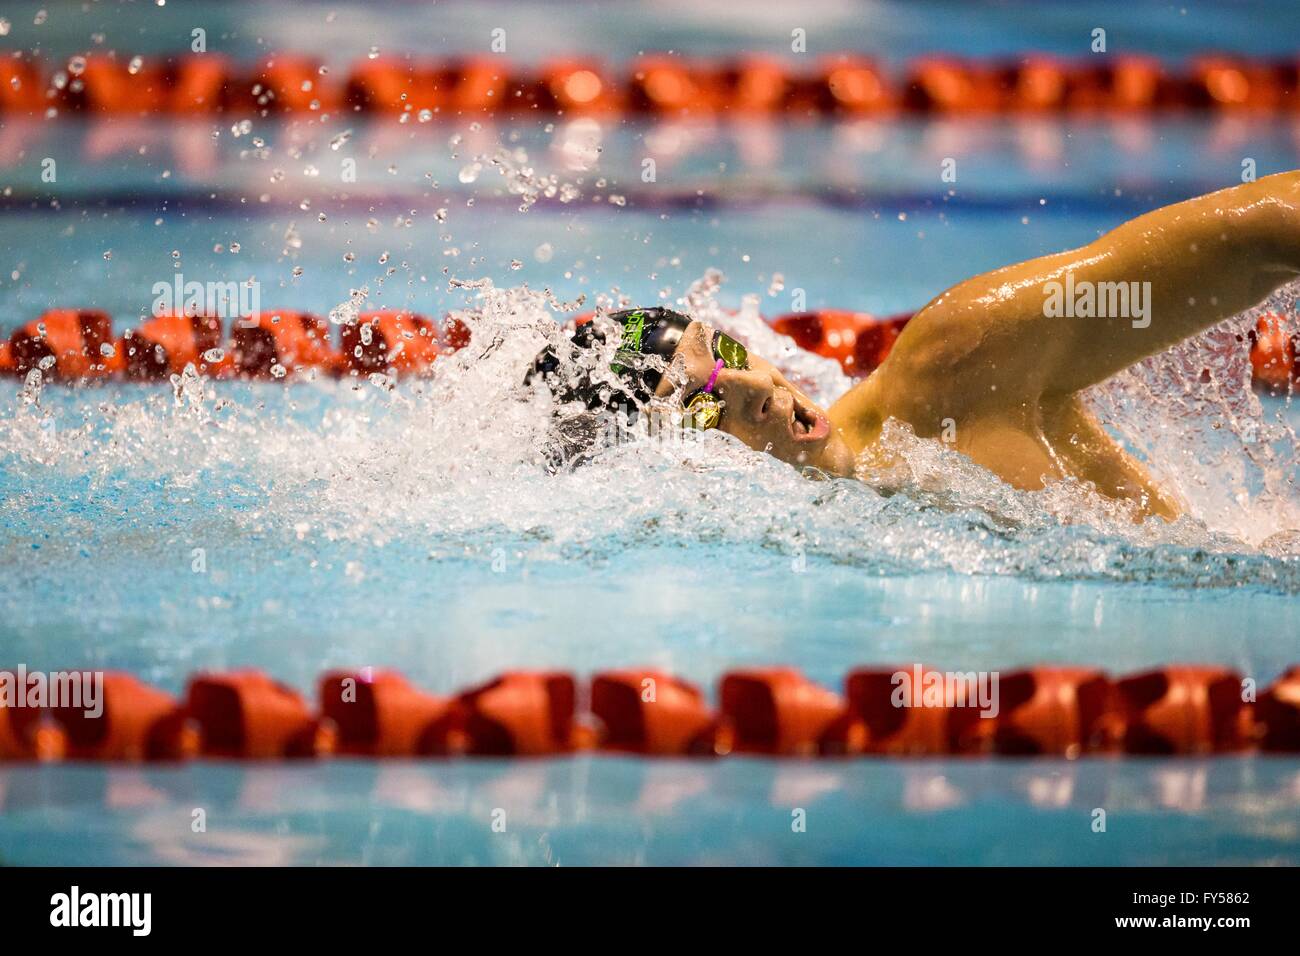 GLASGOW, UK: April, 12, 2016 James Guy of Great Britain in action during the Men's 400m Freestyle Final Stock Photo